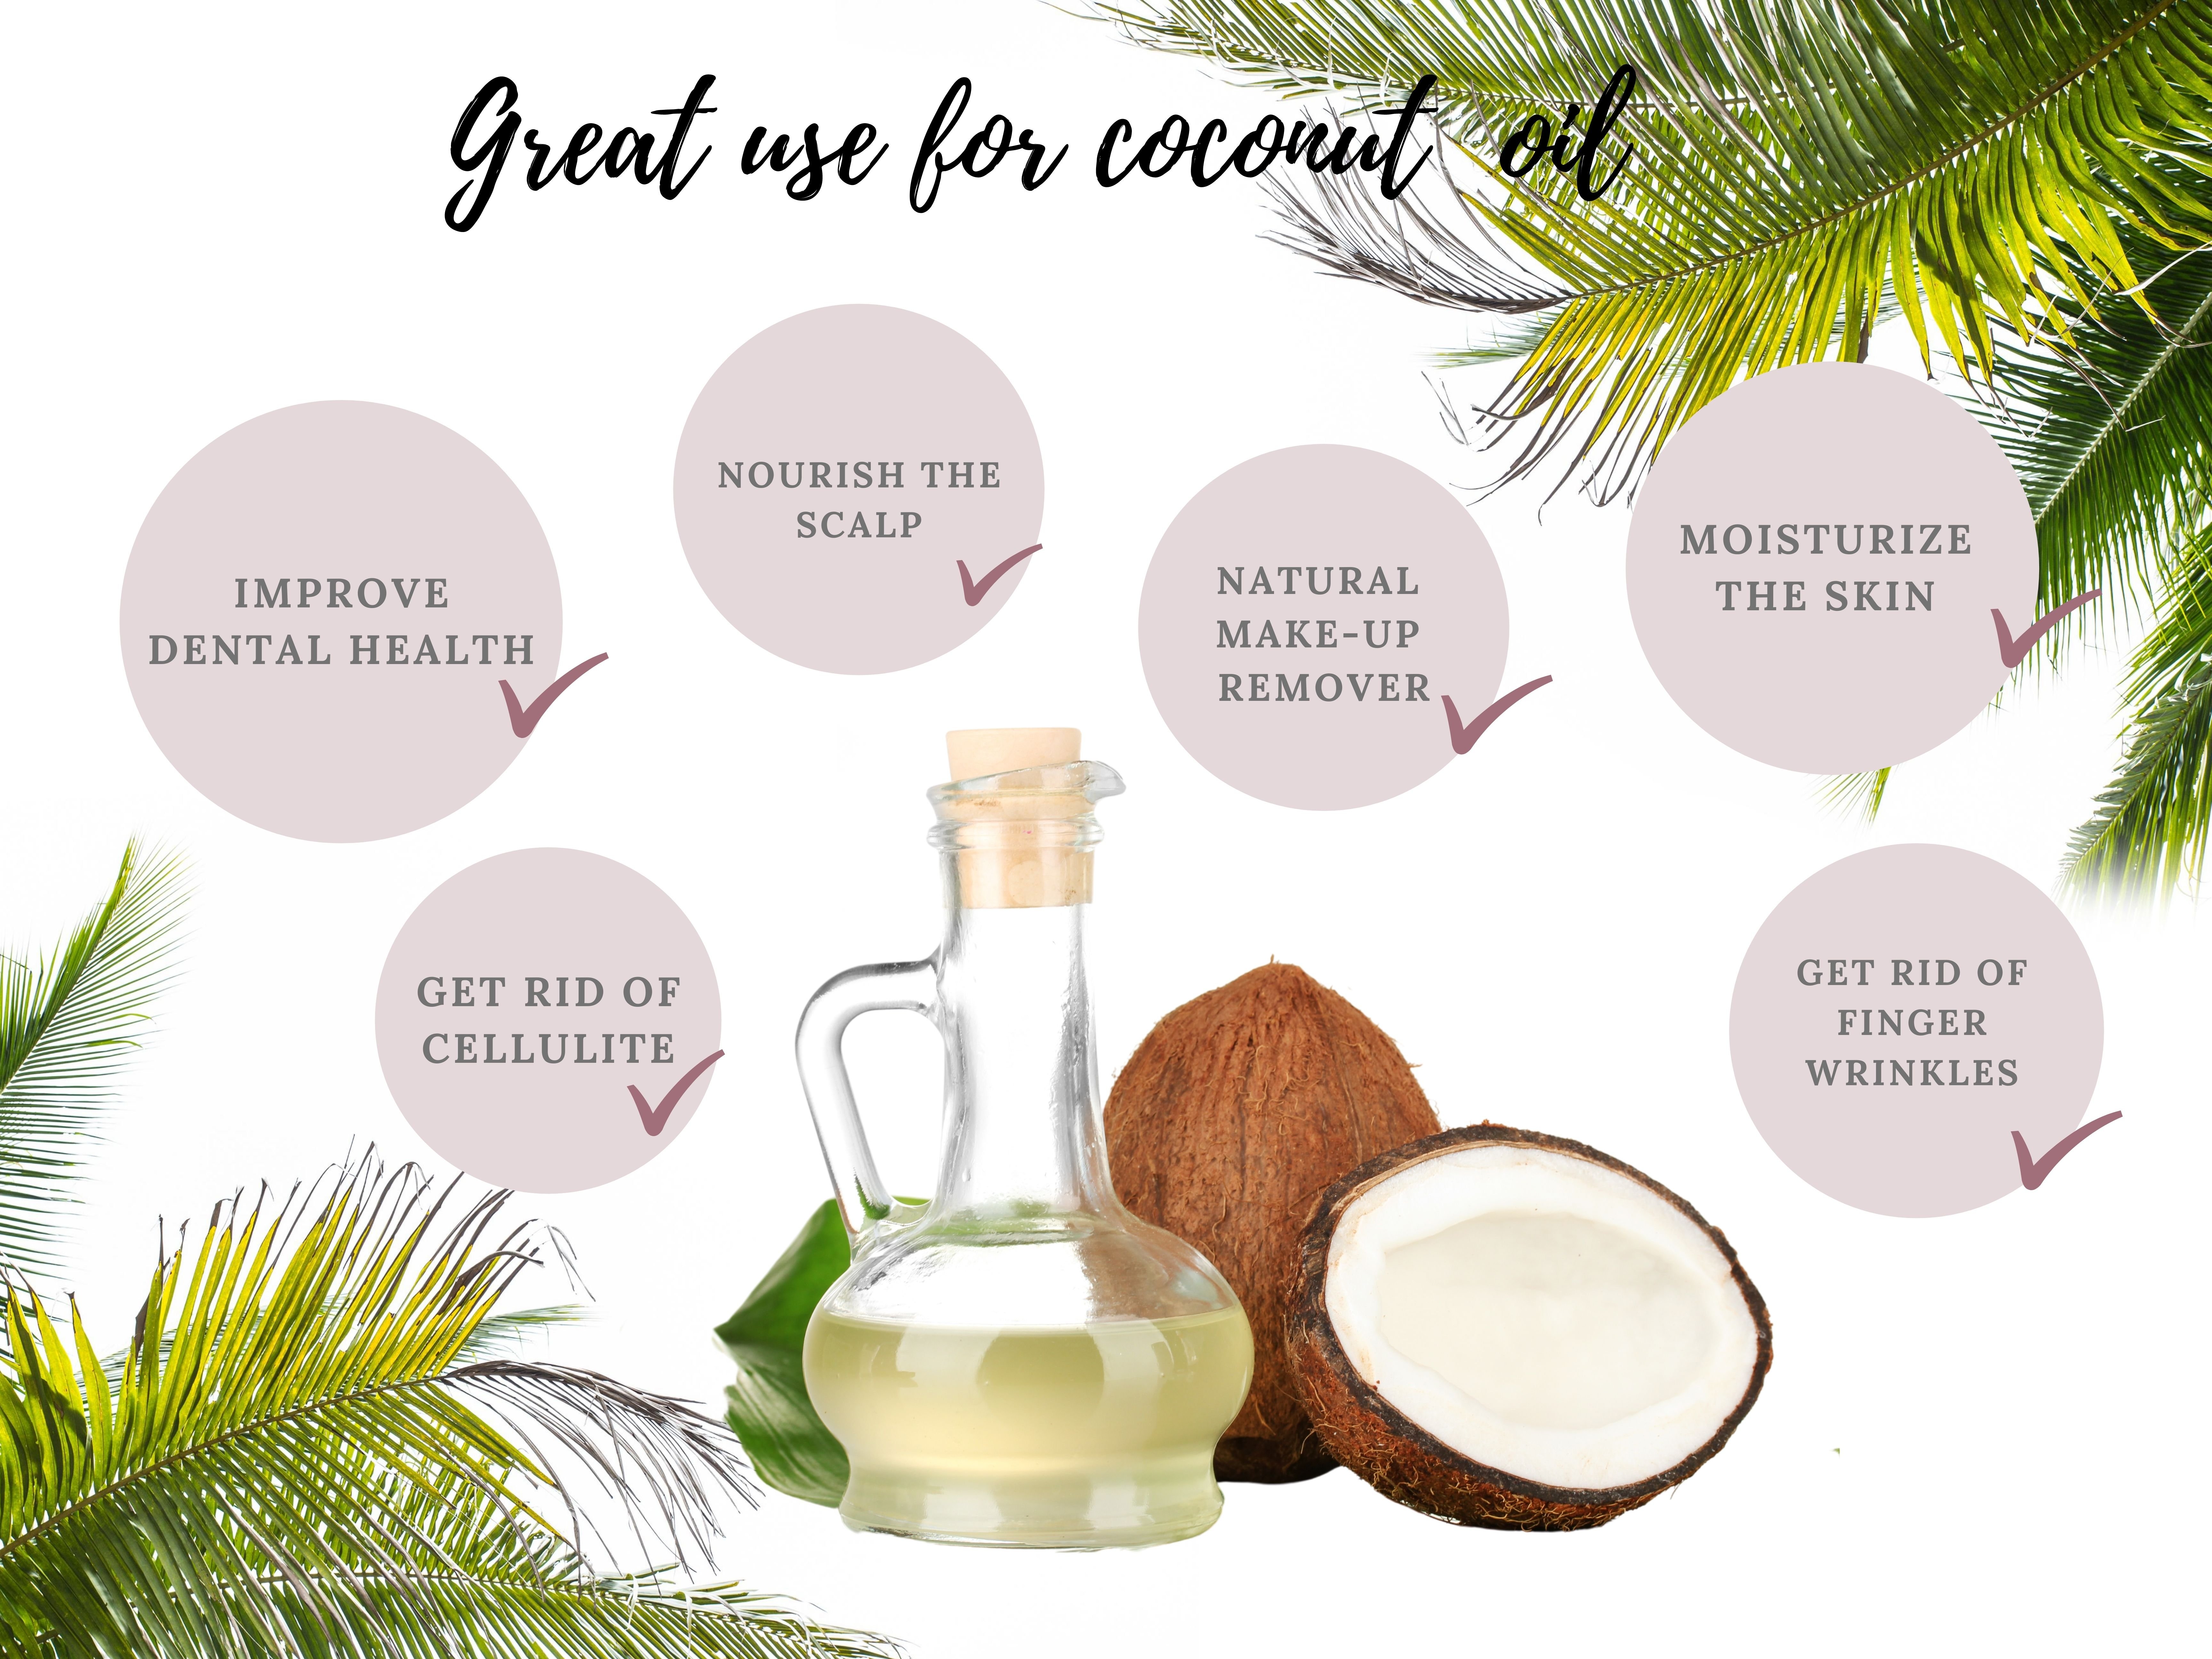 The Amazing Beauty Benefits of Coconut Oil 2